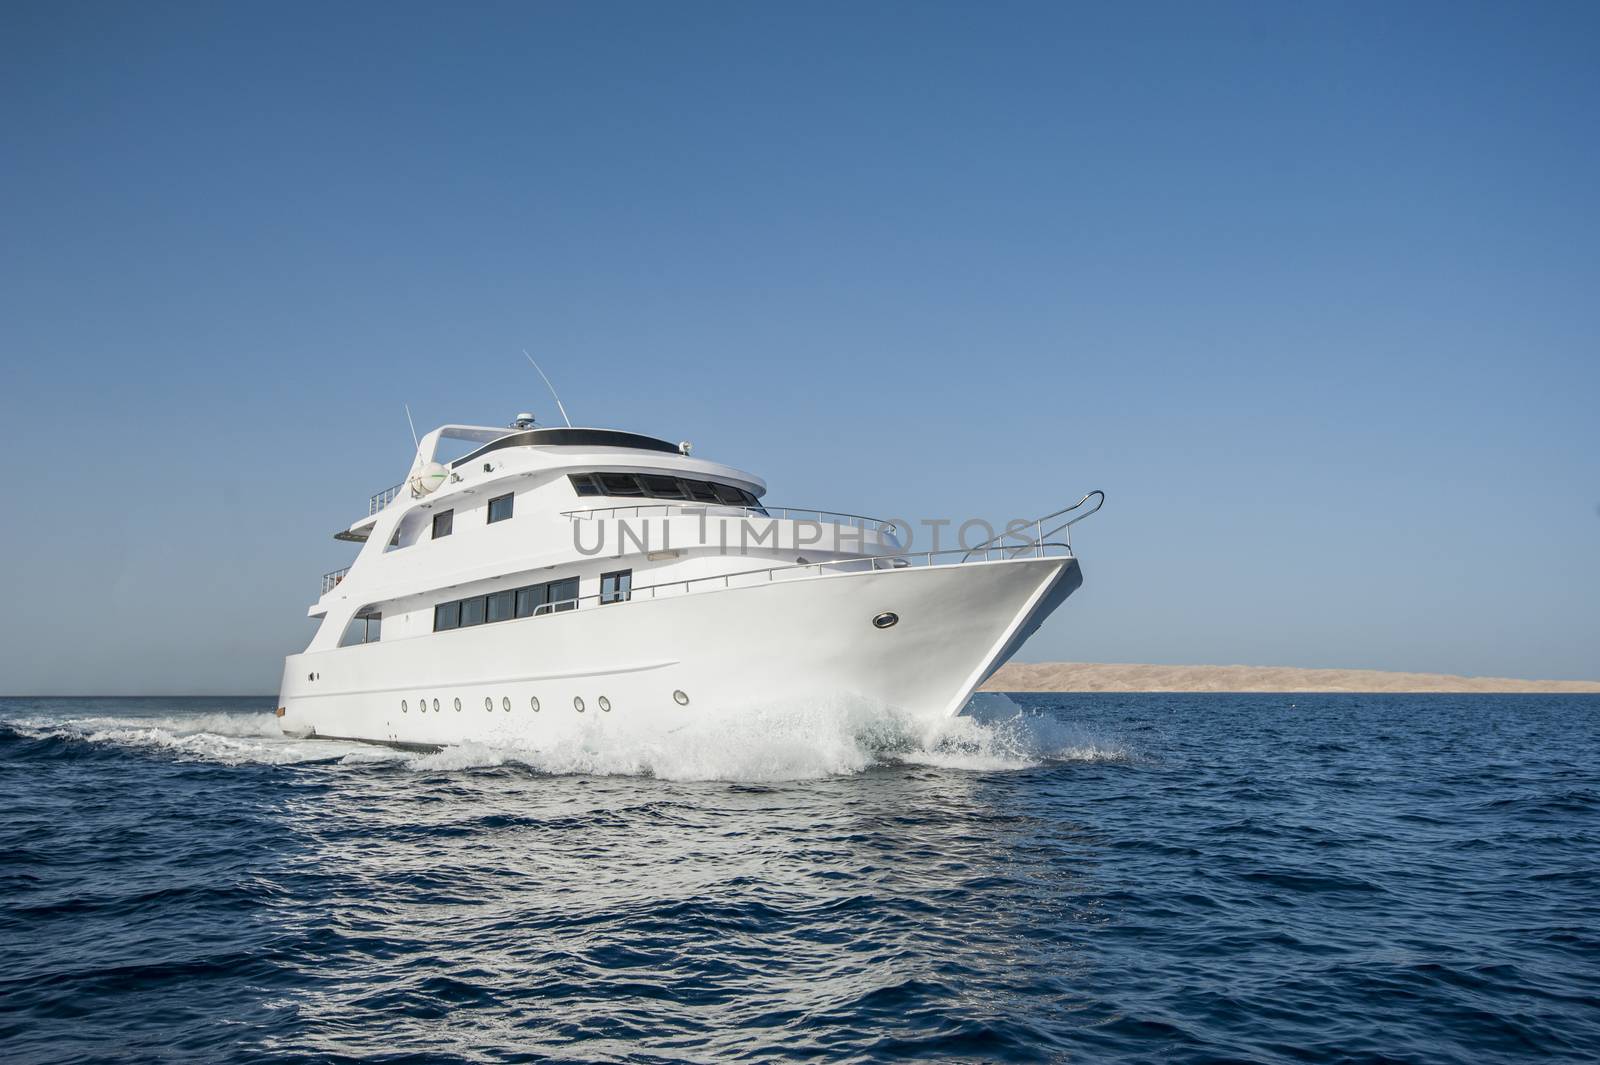 Large luxury motor yacht under way sailing out at sea